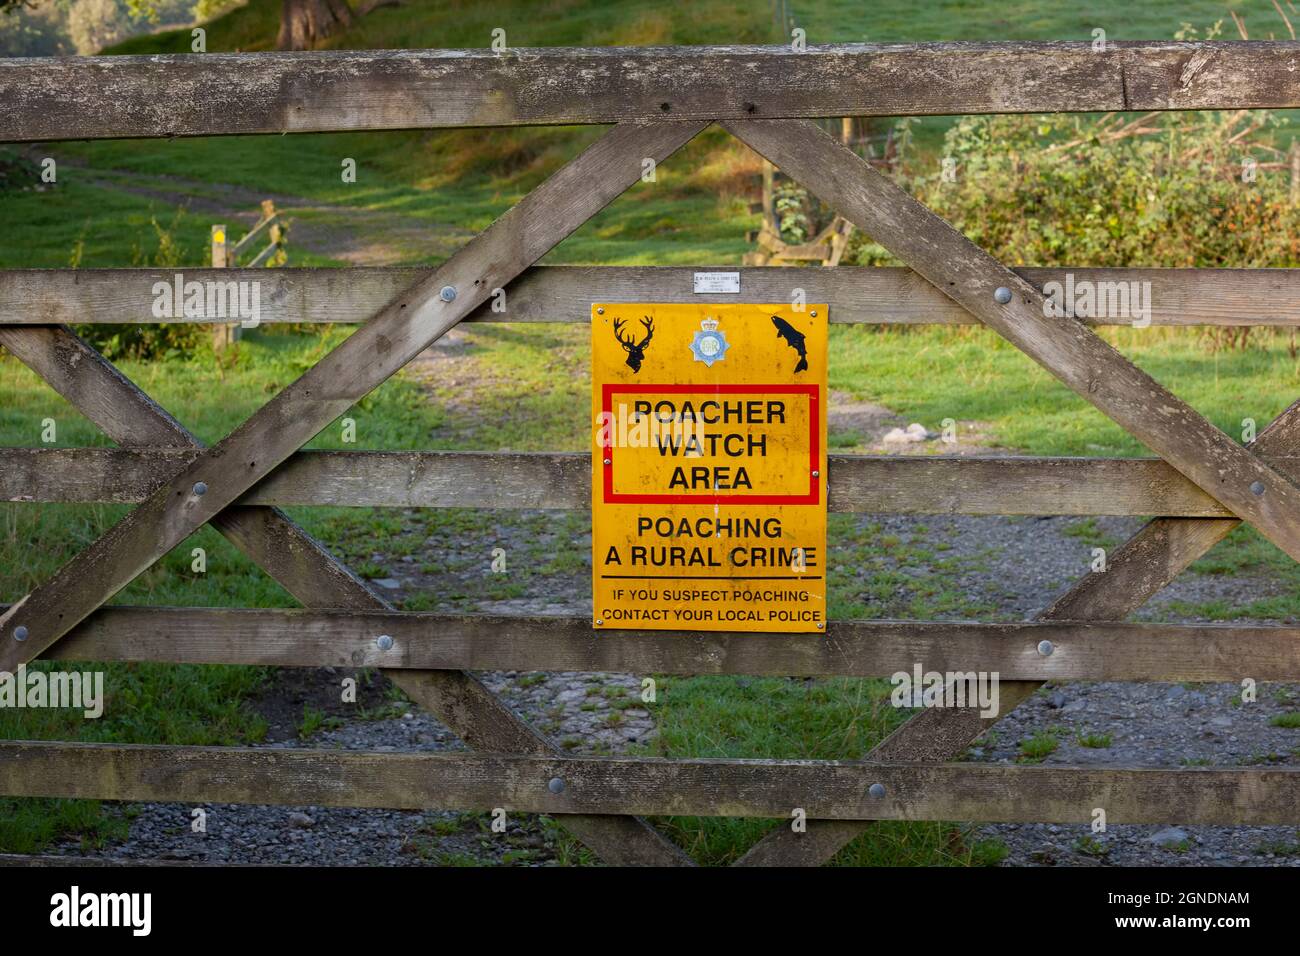 Poacher Watch Area sign in the British countryside.The sign is on a wooden gate. Stock Photo